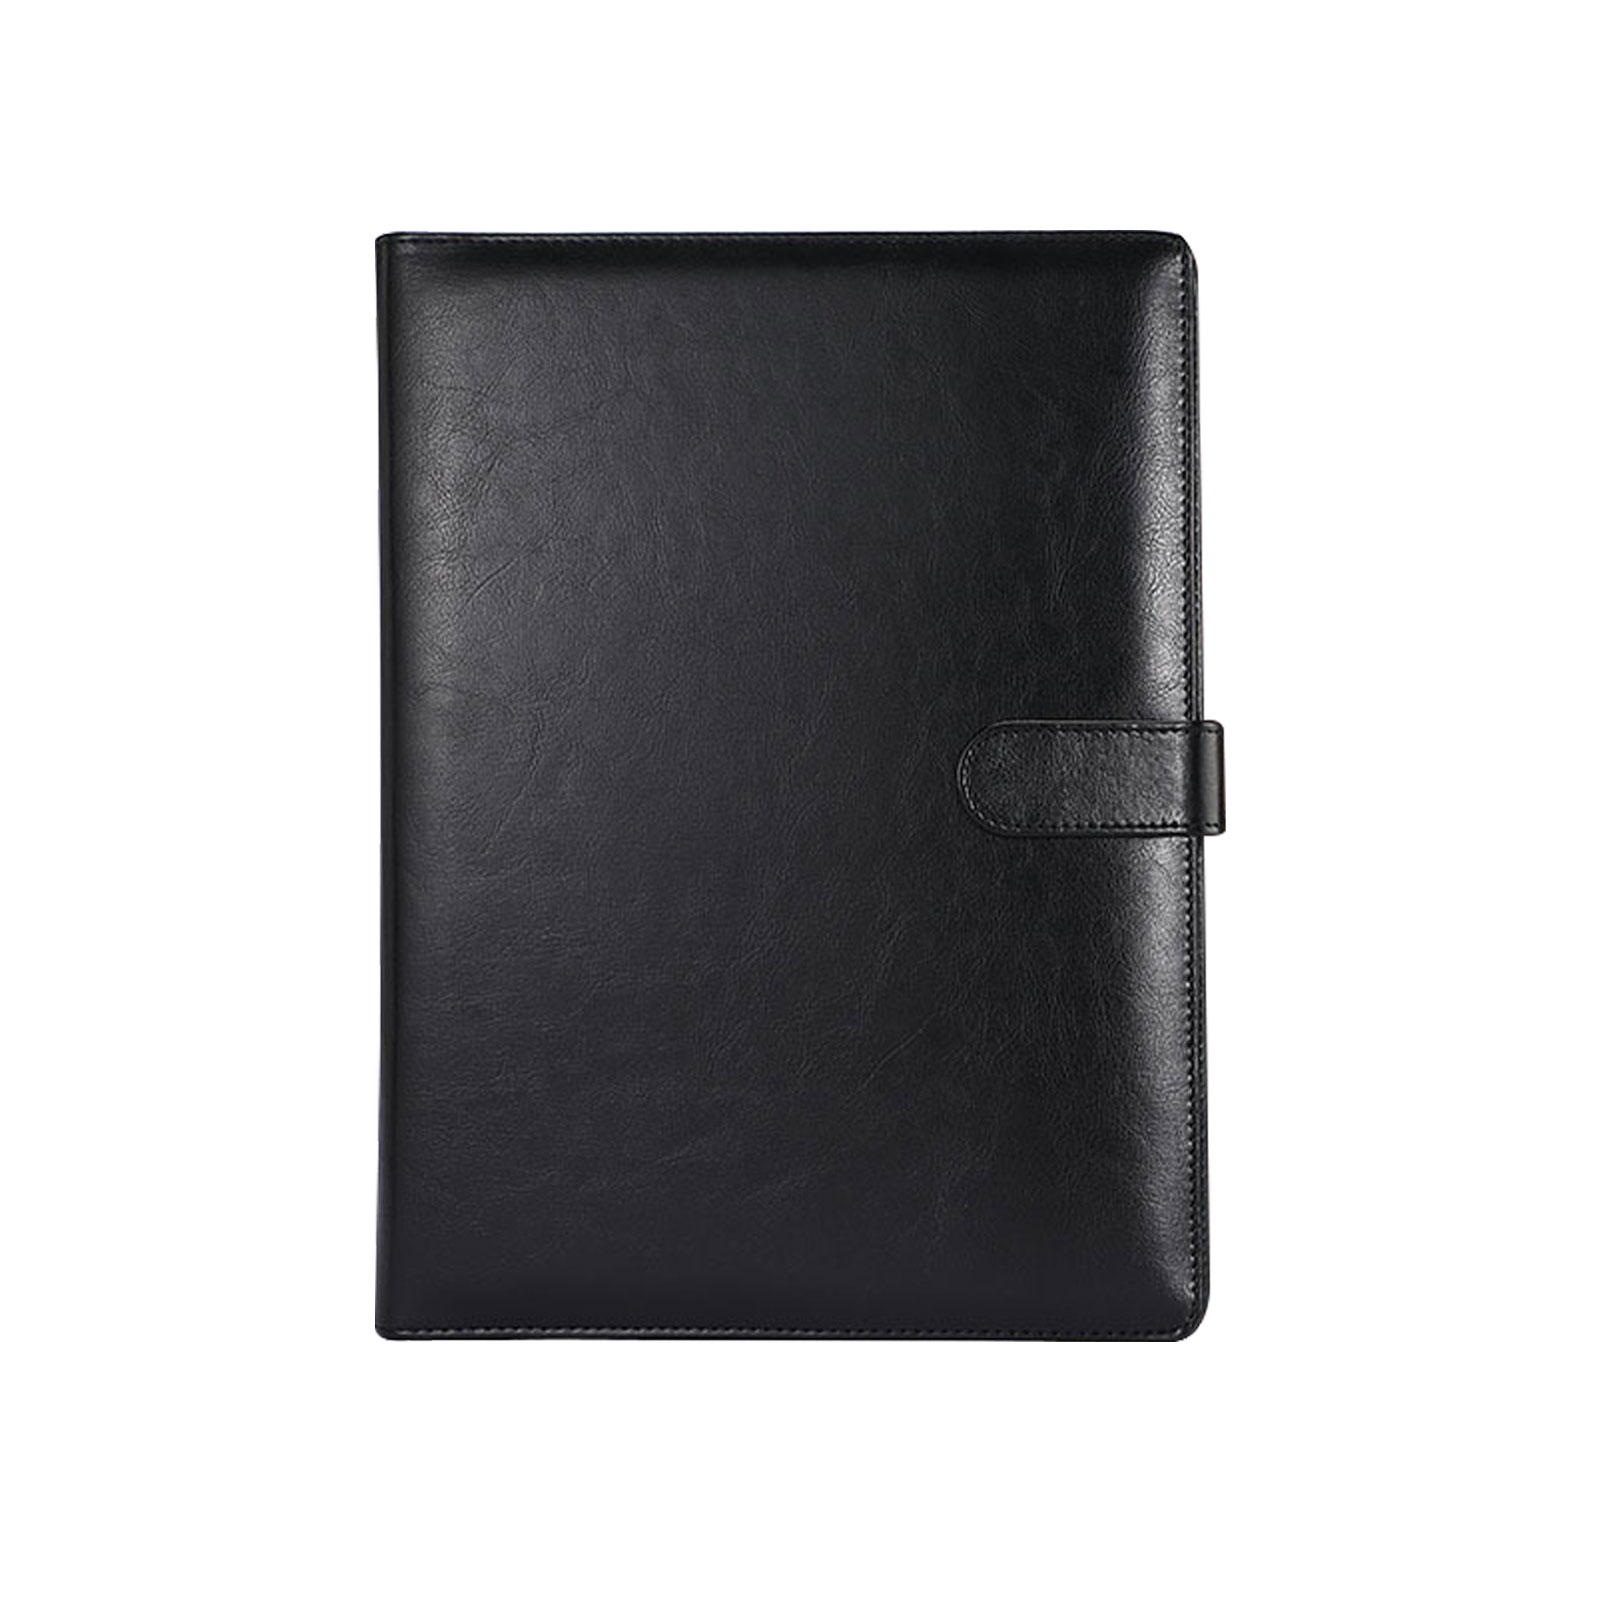 PU Leather Magnetic Buckle Practical For Document Durable With Note Paper Portable Business Multifunctional Padfolio Organizer